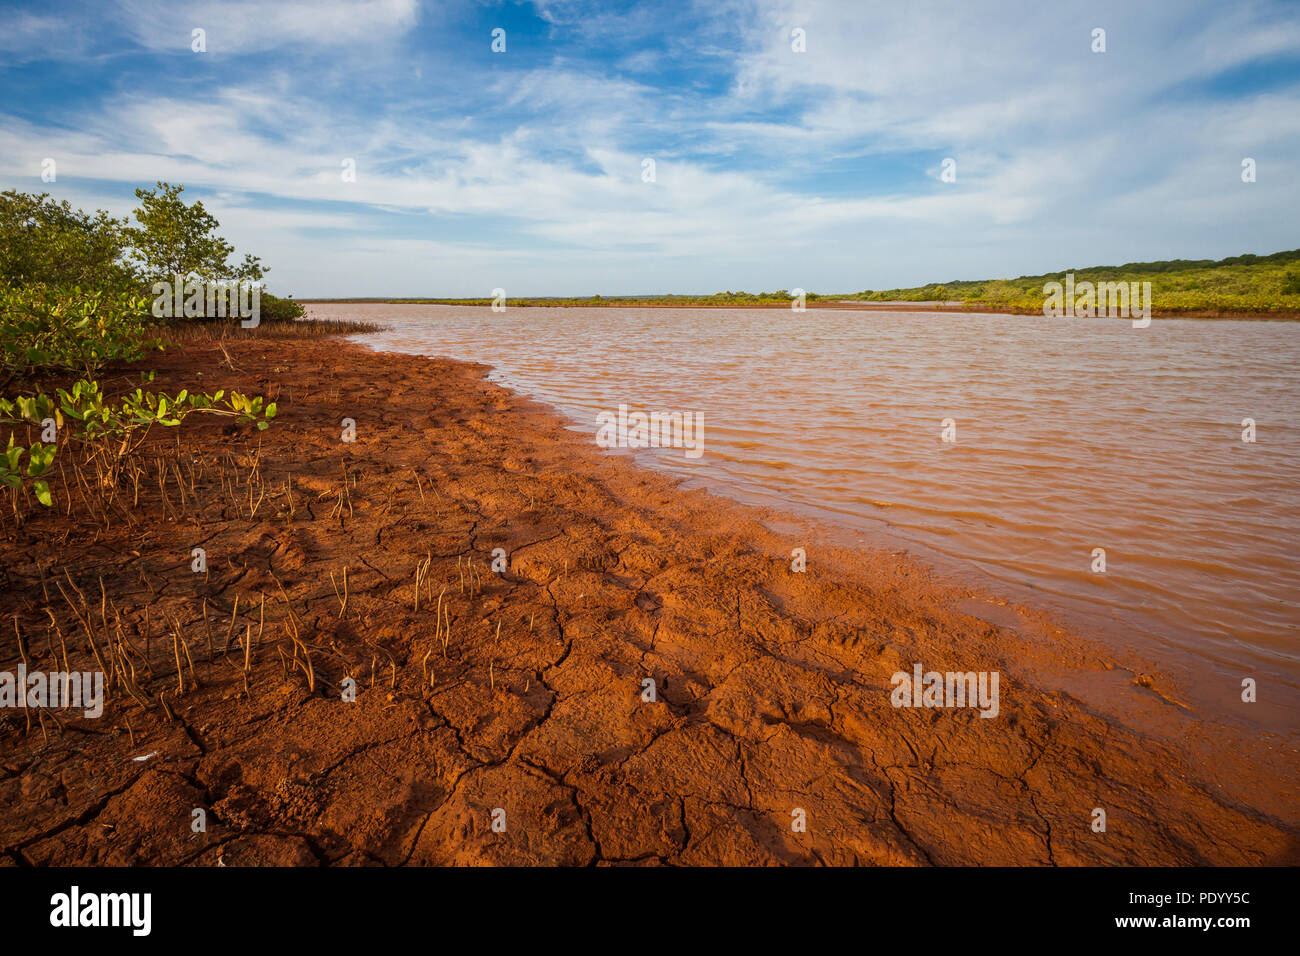 Panama landscape with cracked soil and a small lake in Sarigua national park (desert), Herrera province, Republic of Panama. Stock Photo